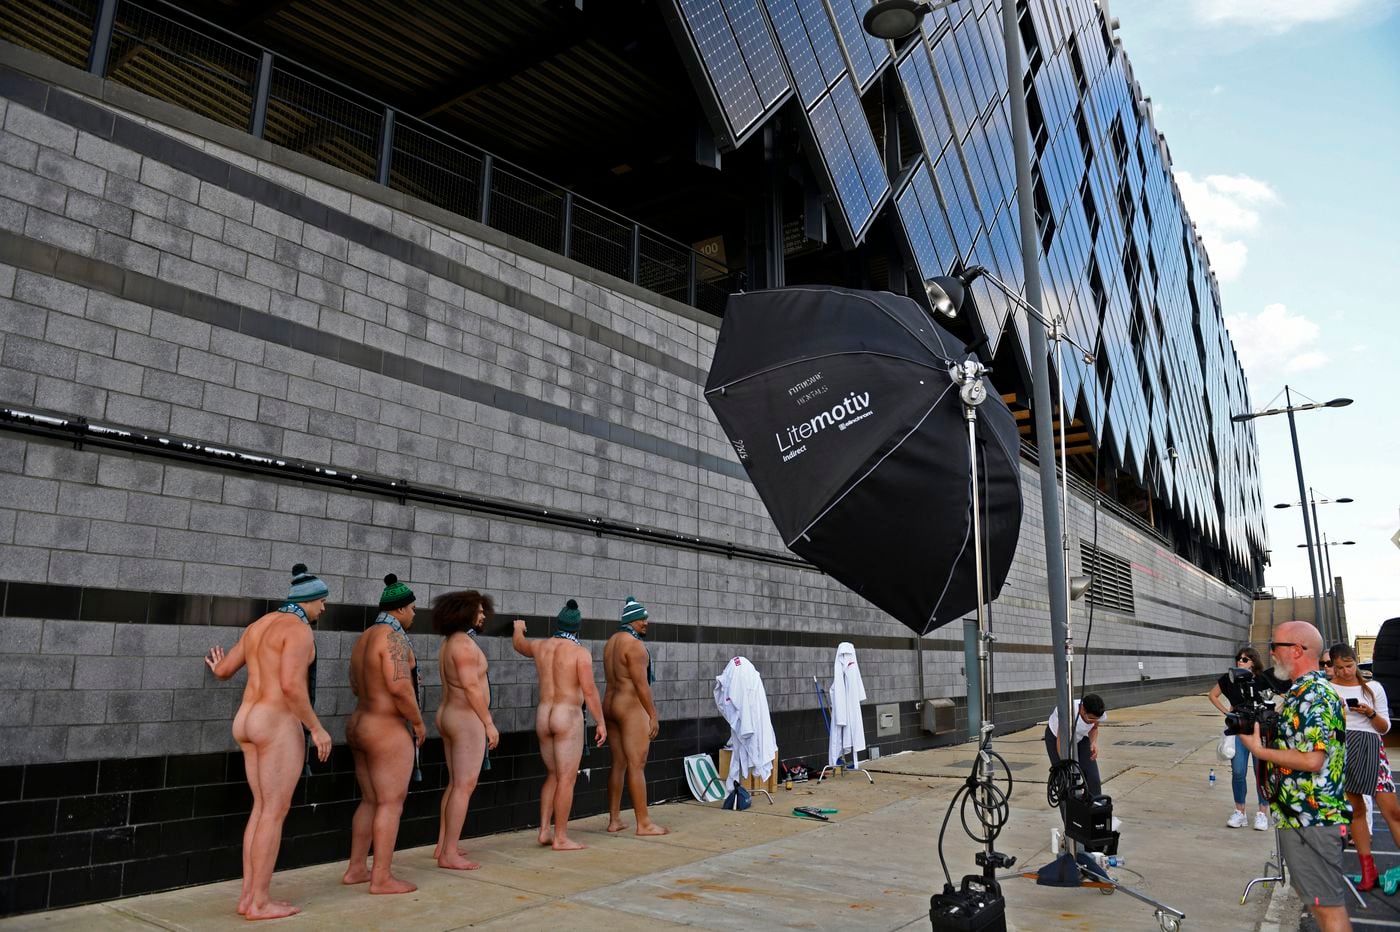 Vacation Nudist Gallery - Eagles' offensive line poses nude in ESPN's Body Issue ...